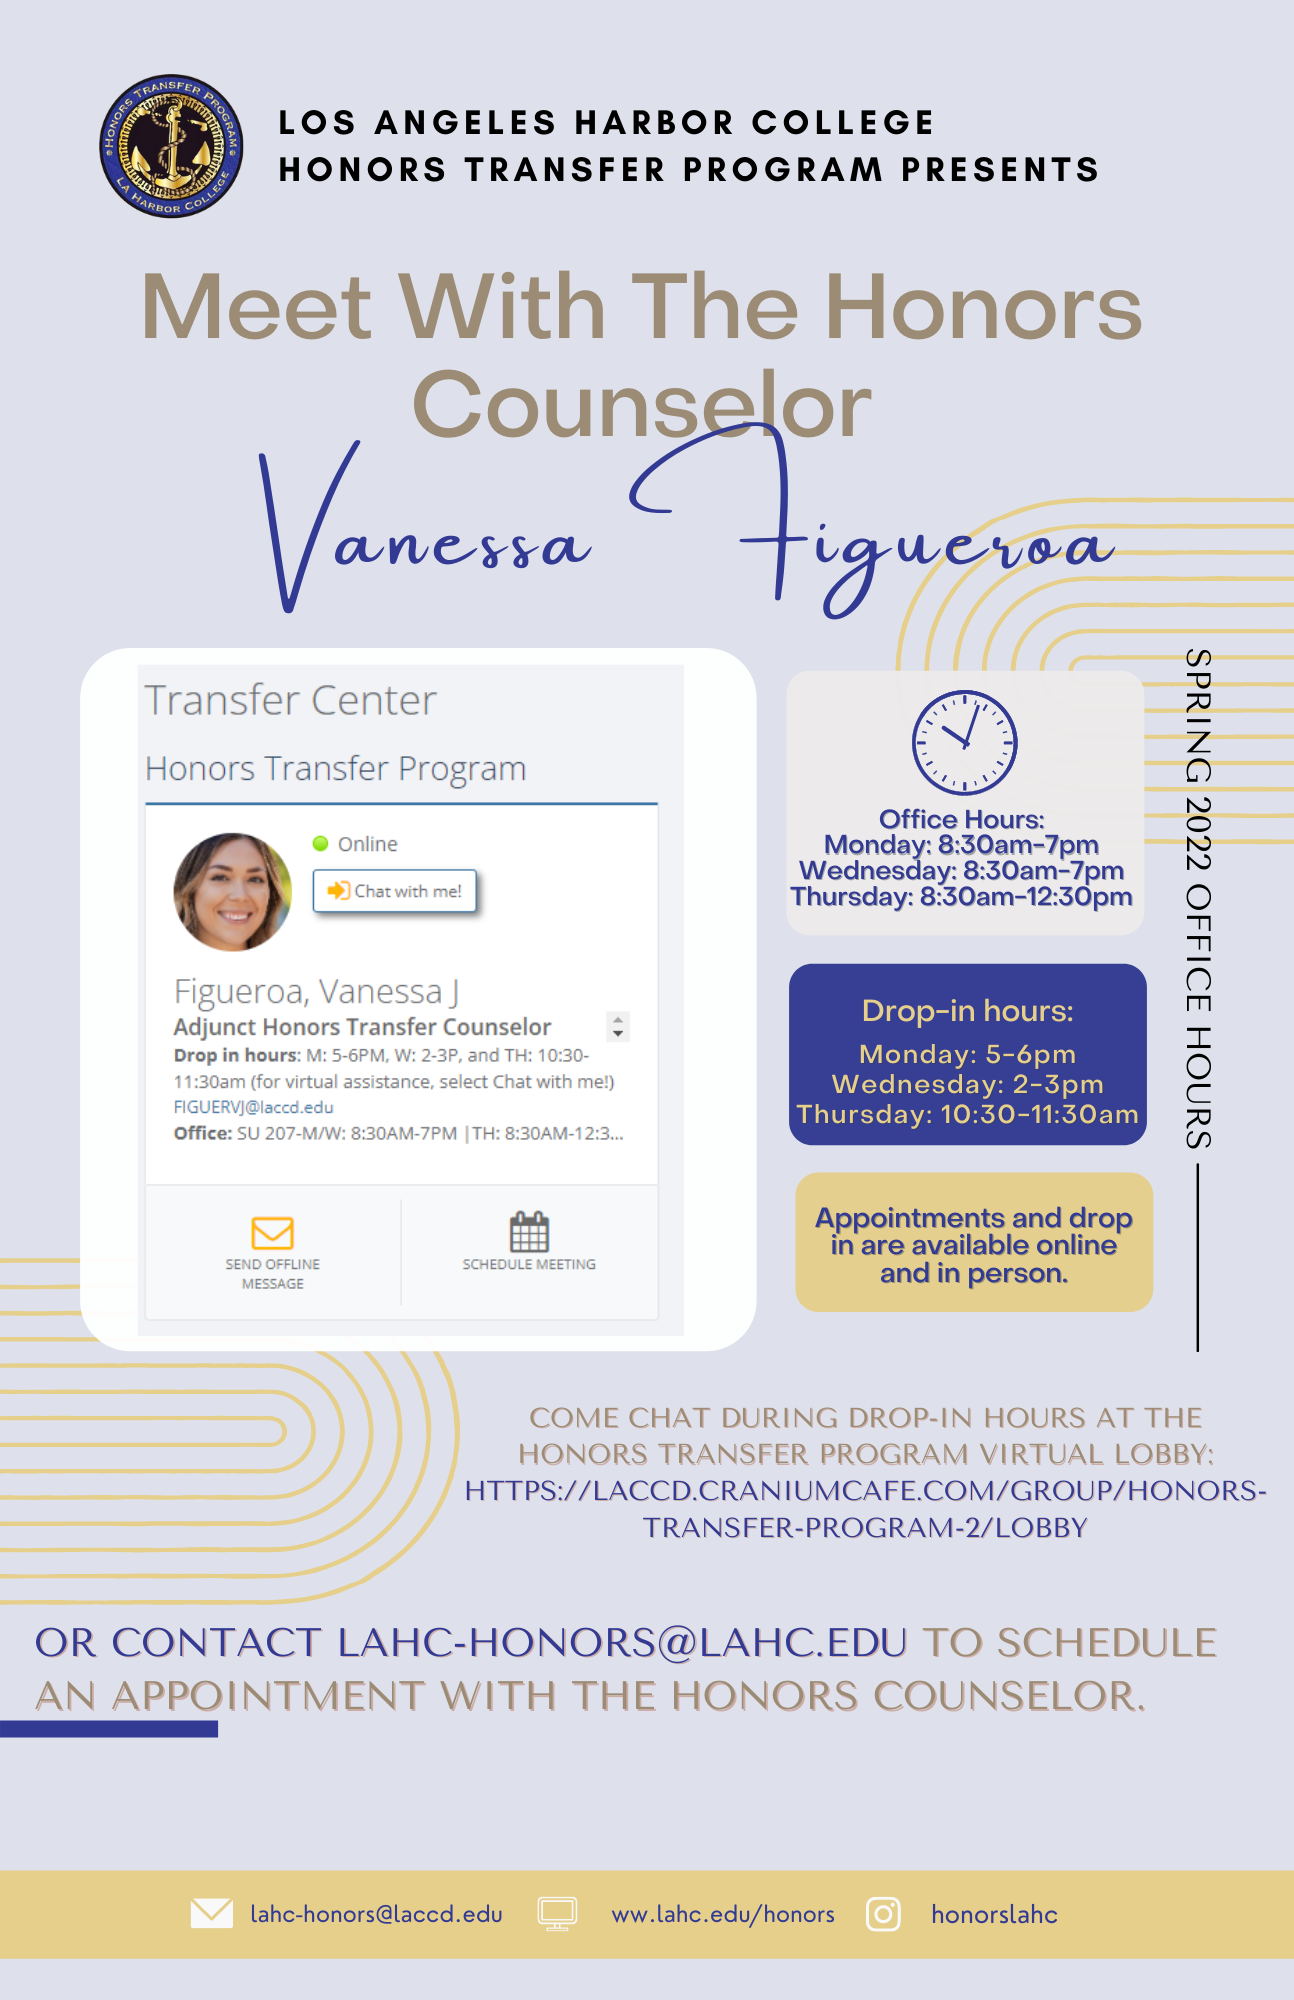 Meet with the Honors Counselor